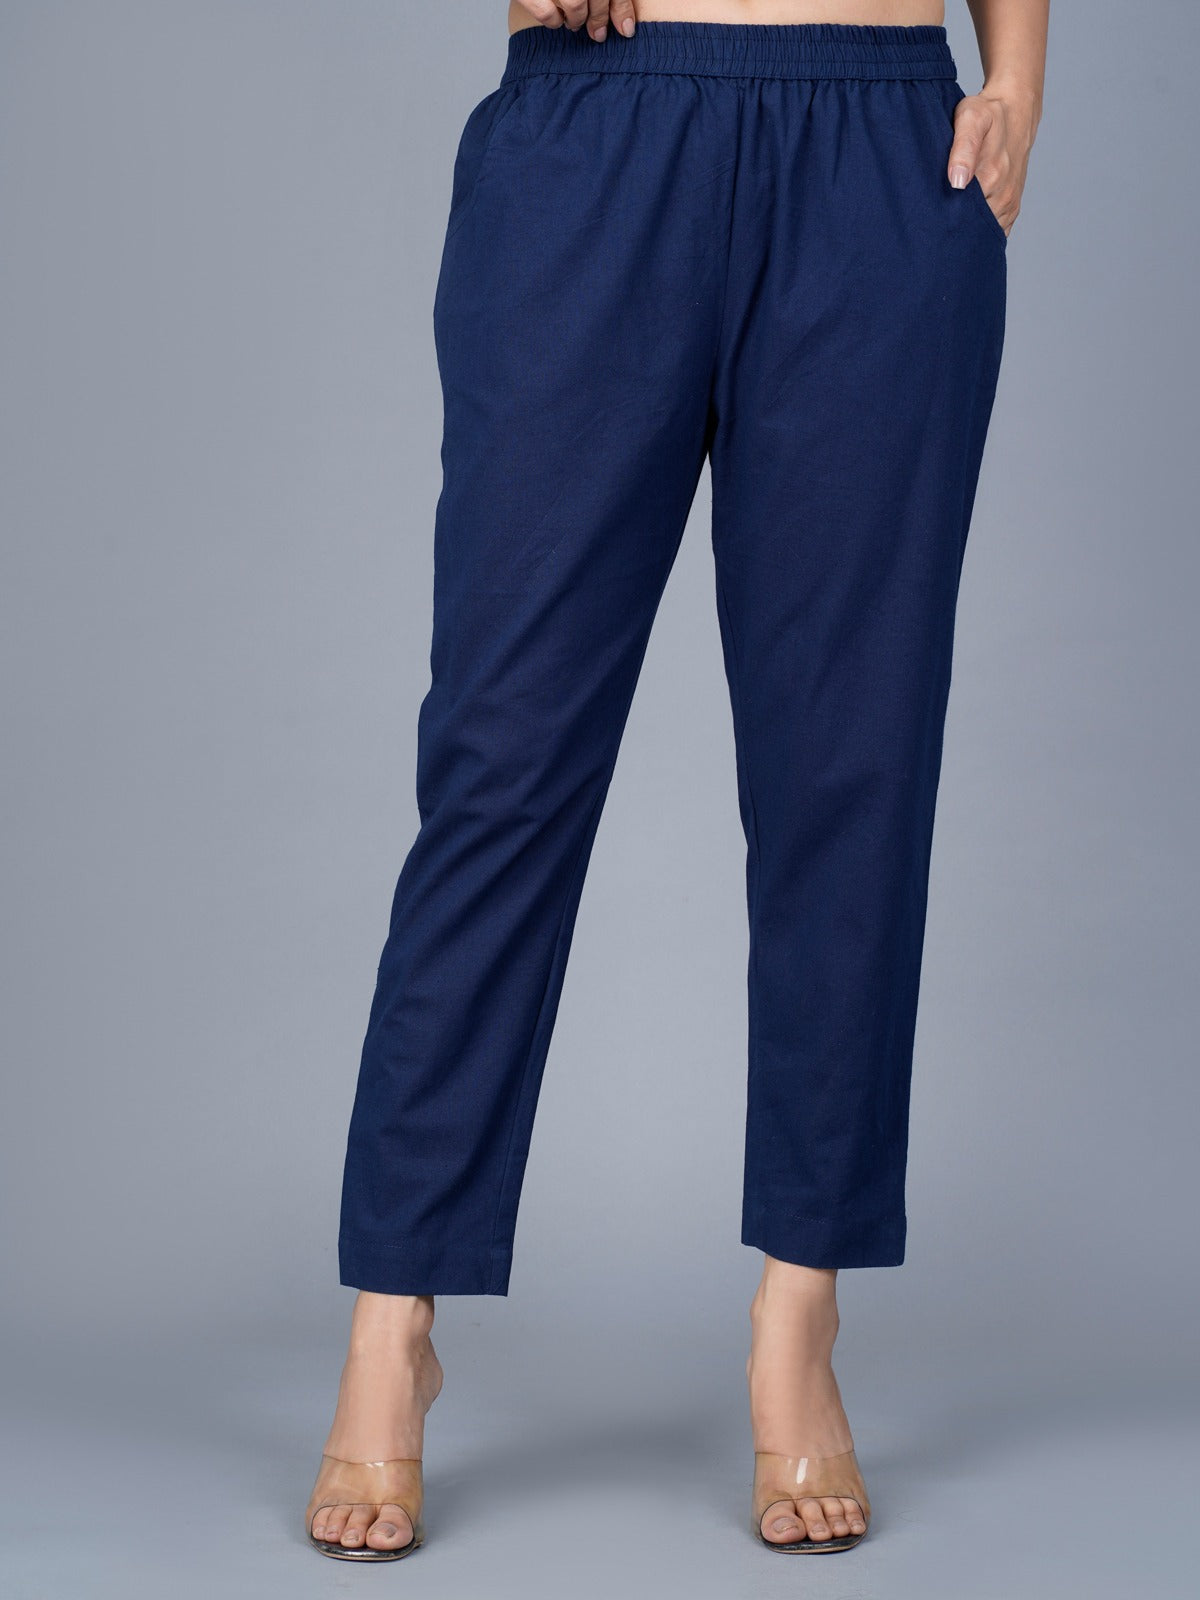 Pack Of 2 Womens Regular Fit Melange Grey And Navy Blue Fully Elastic Waistband Cotton Trouser